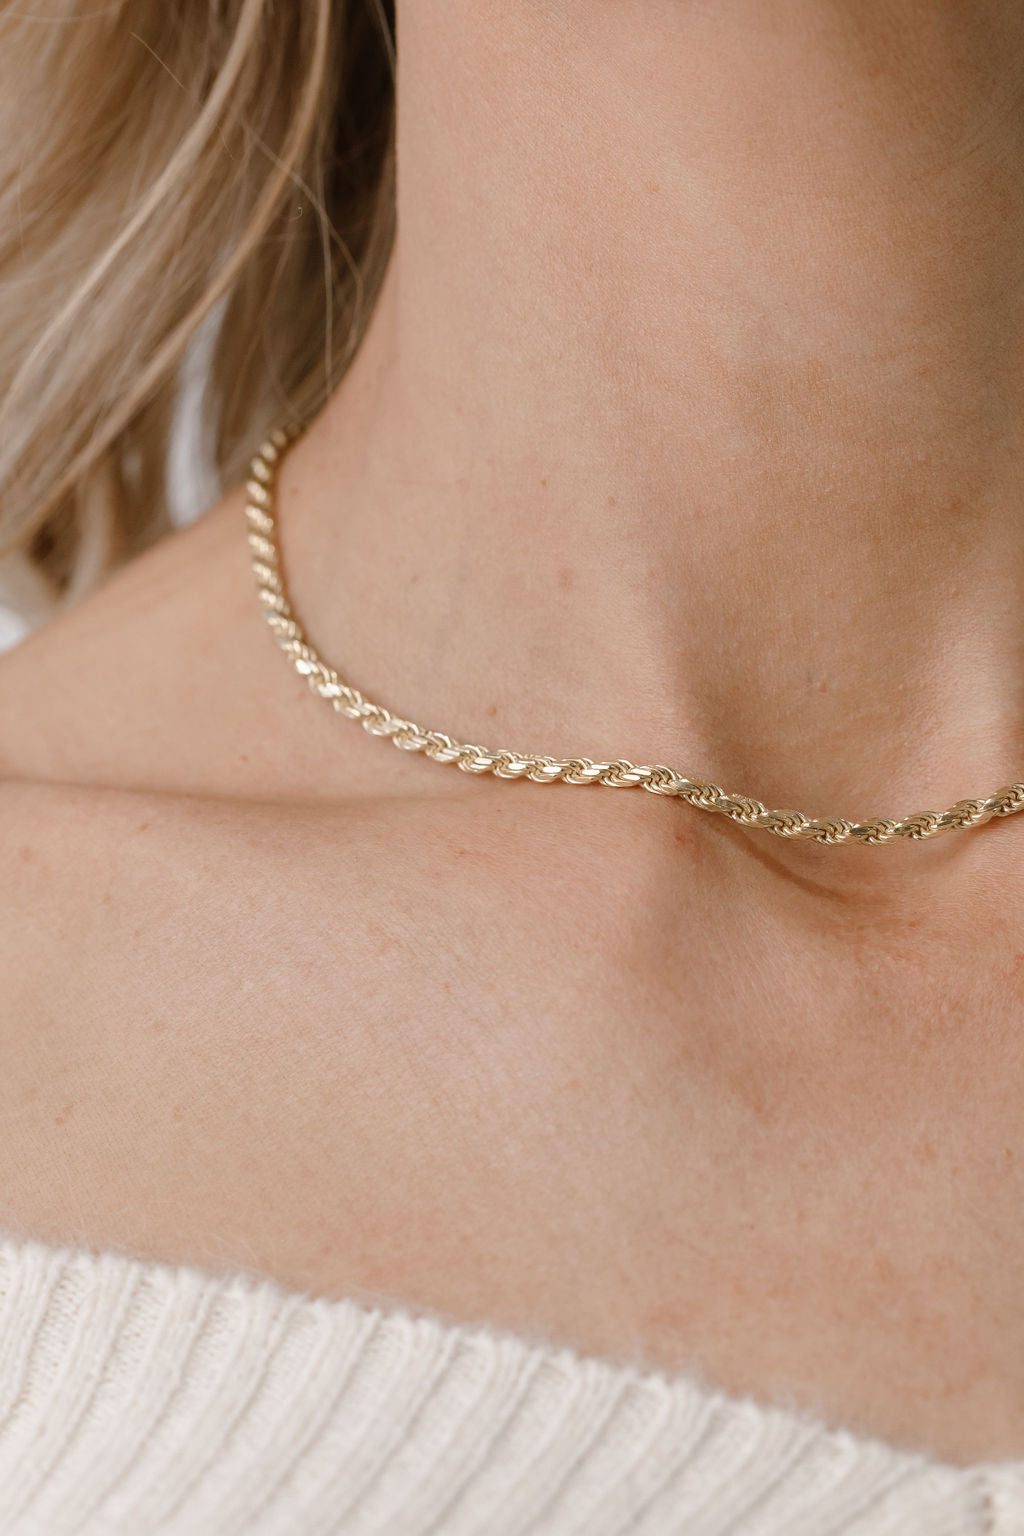 gold rope chain